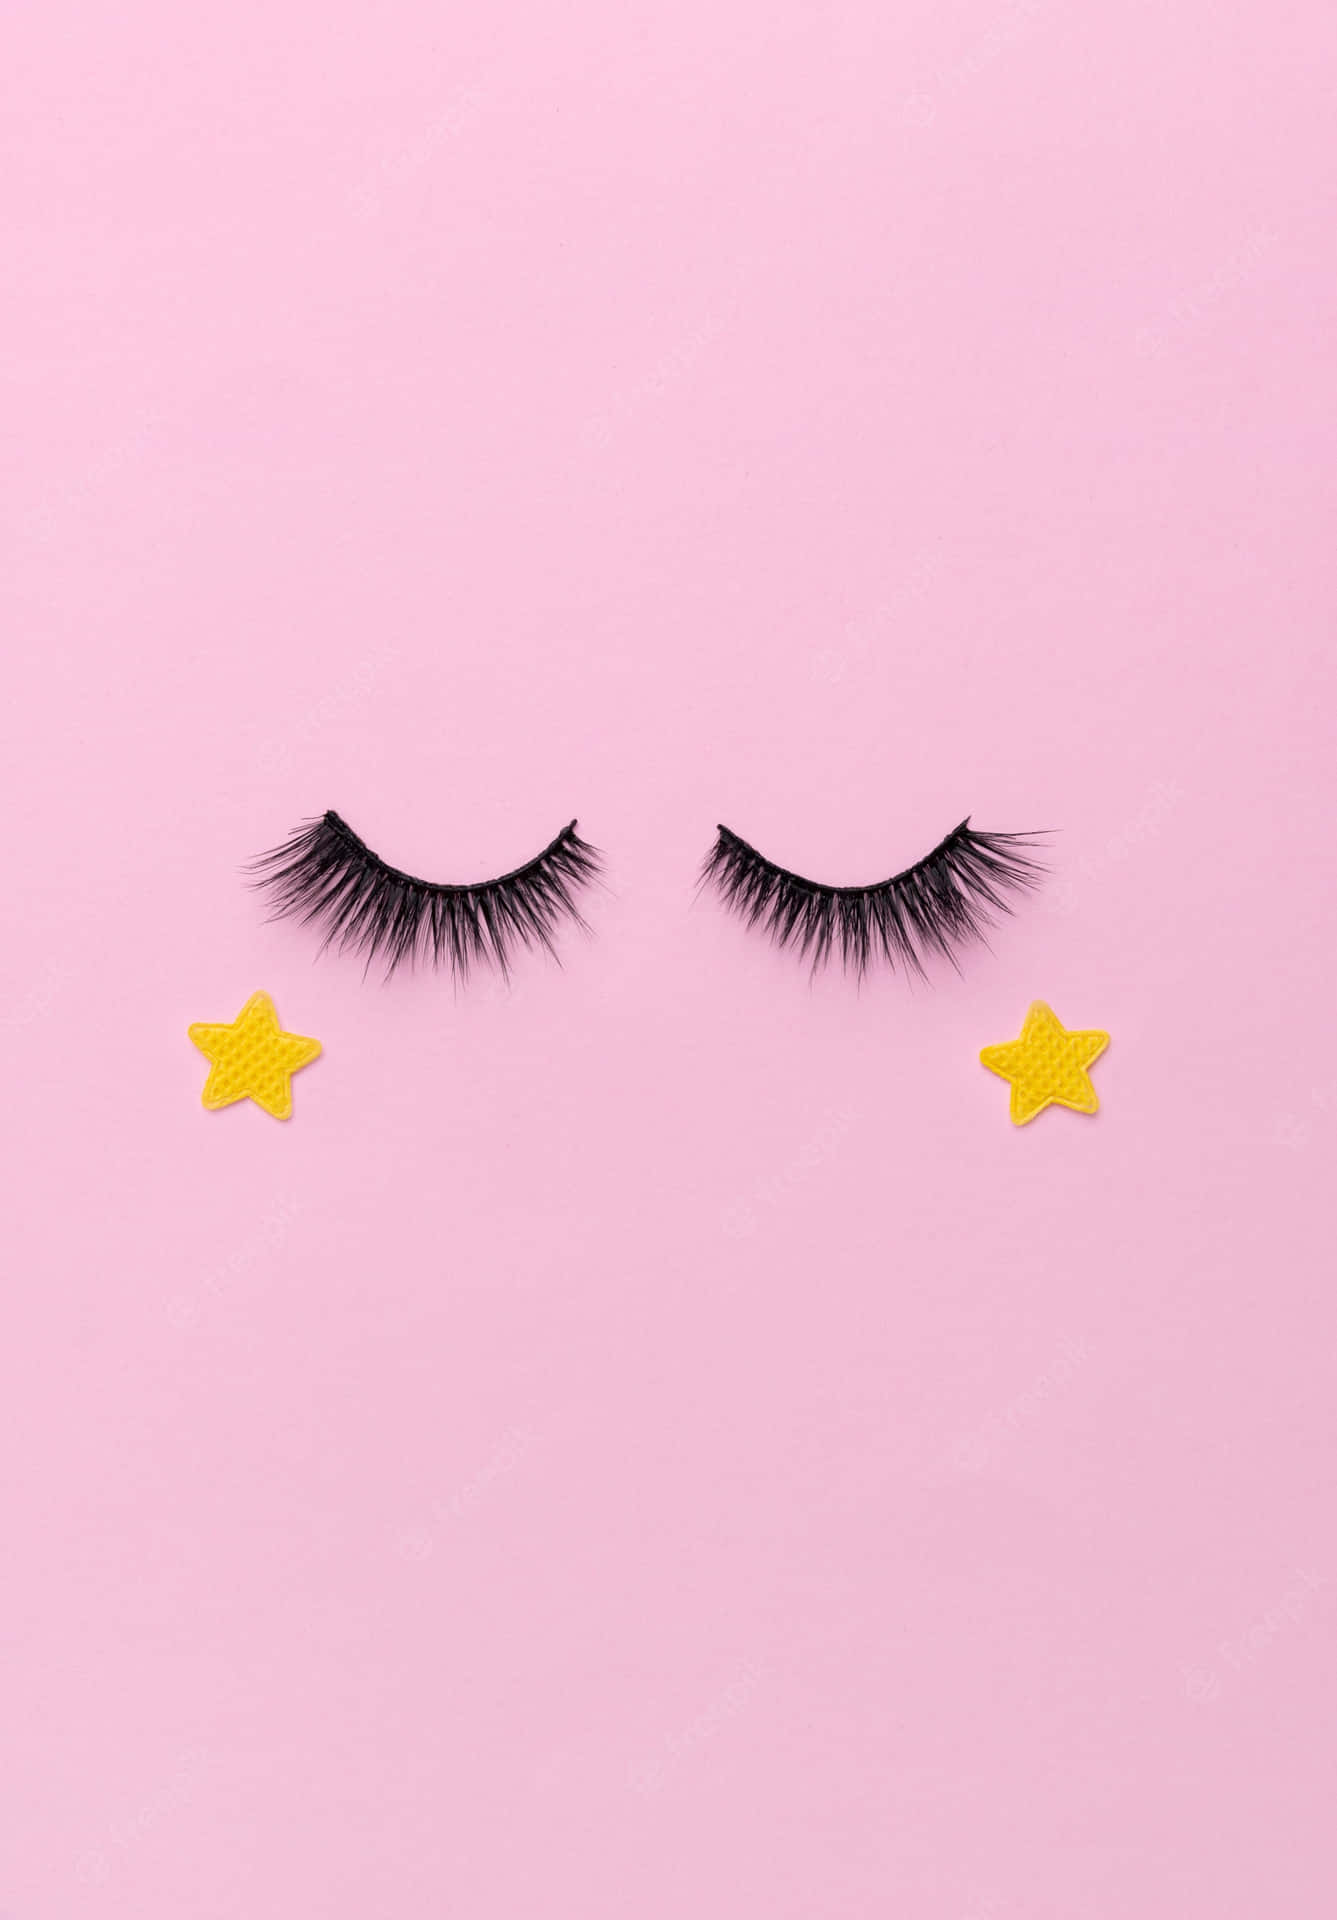 A Pair Of False Eyelashes With Stars On A Pink Background Wallpaper